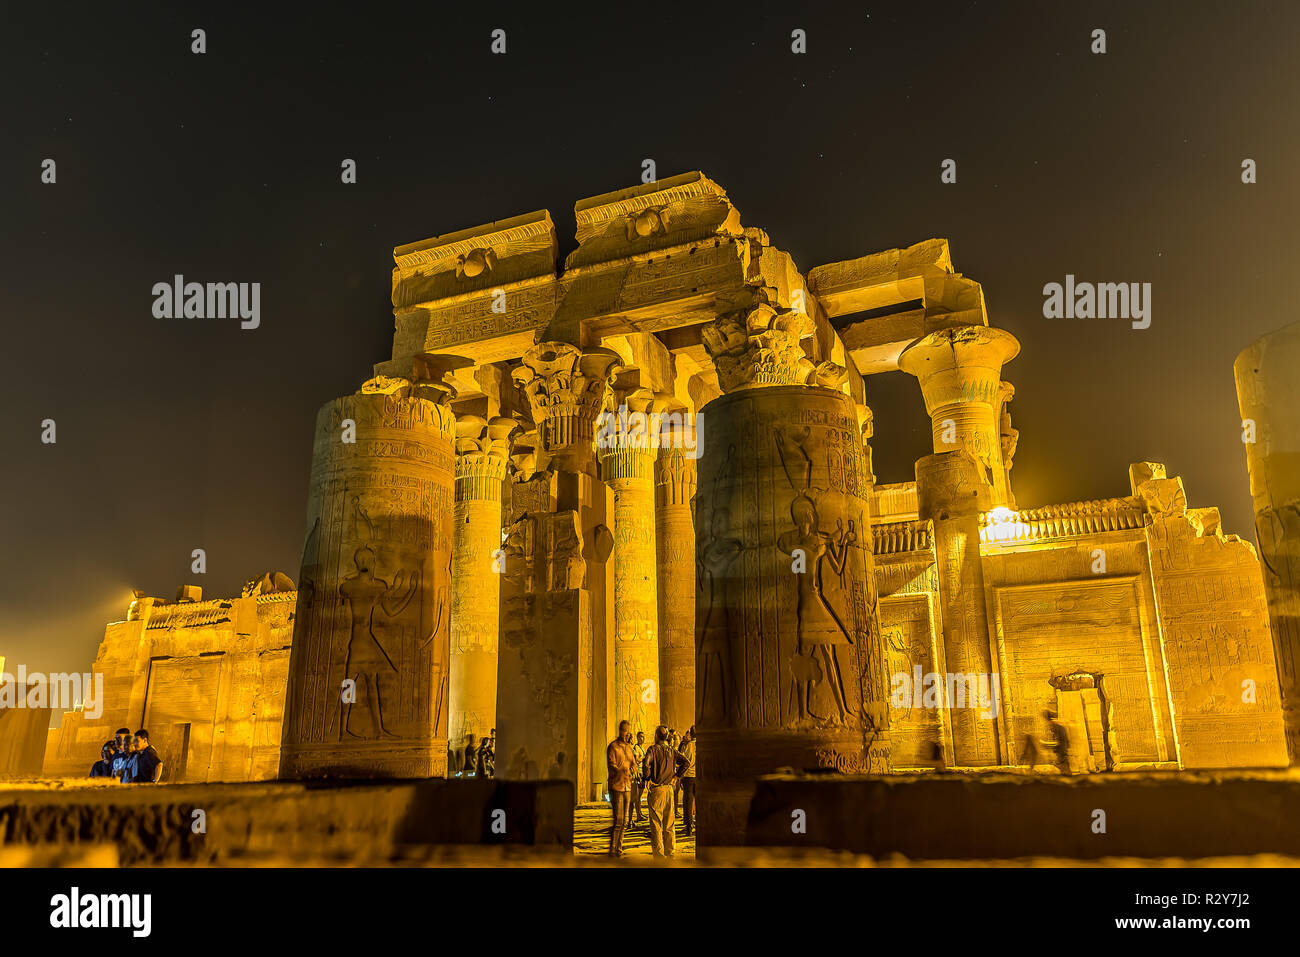 Turists visiting the temple of Kom Ombo at night, Egypt, October 23, 2018 Stock Photo